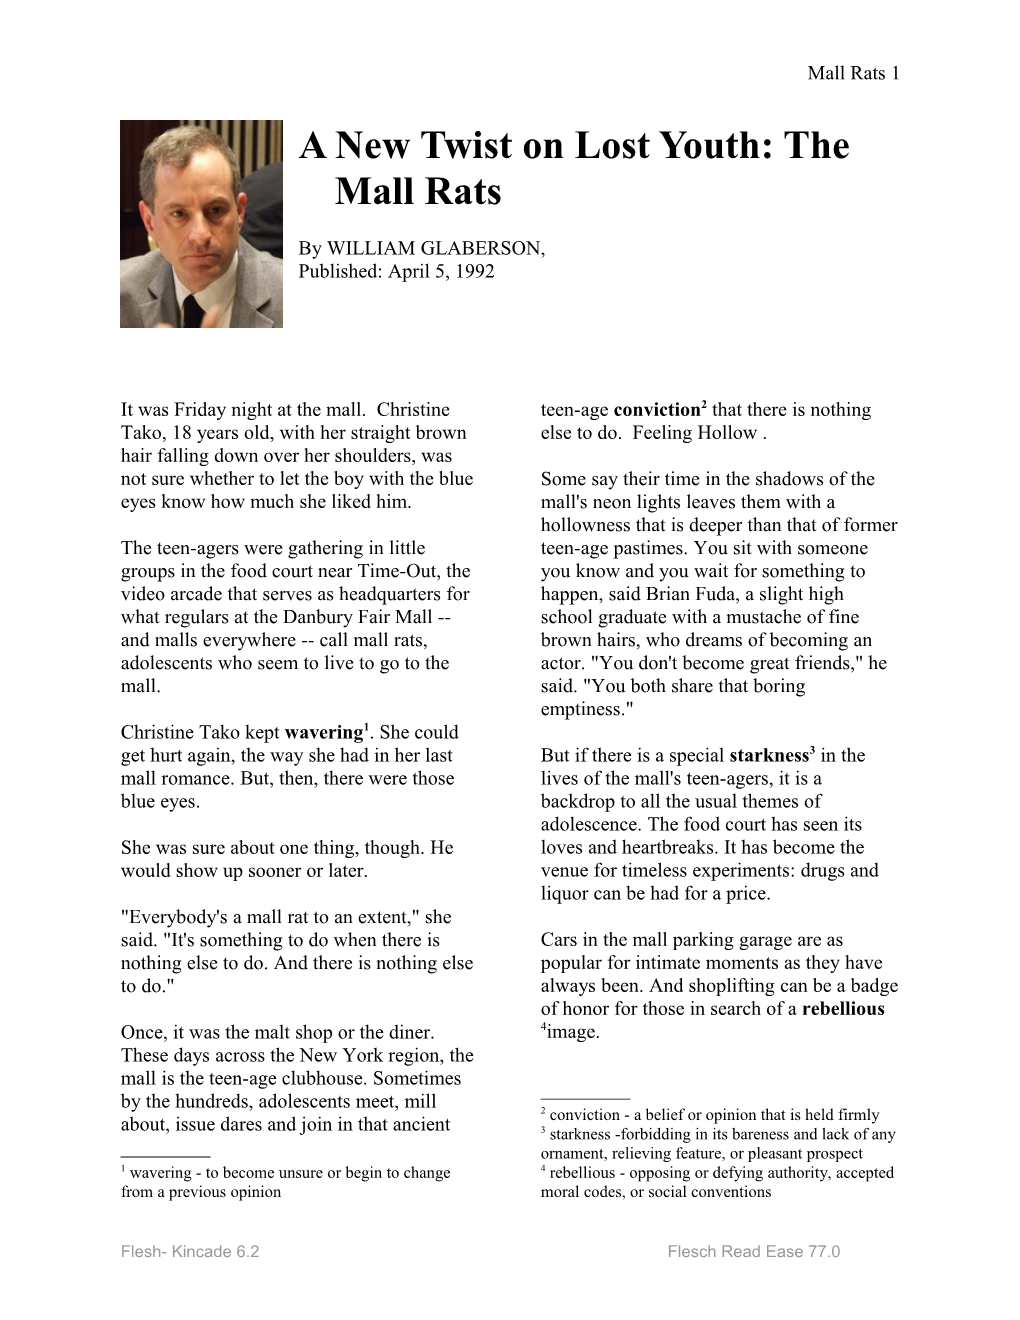 A New Twist on Lost Youth: the Mall Rats